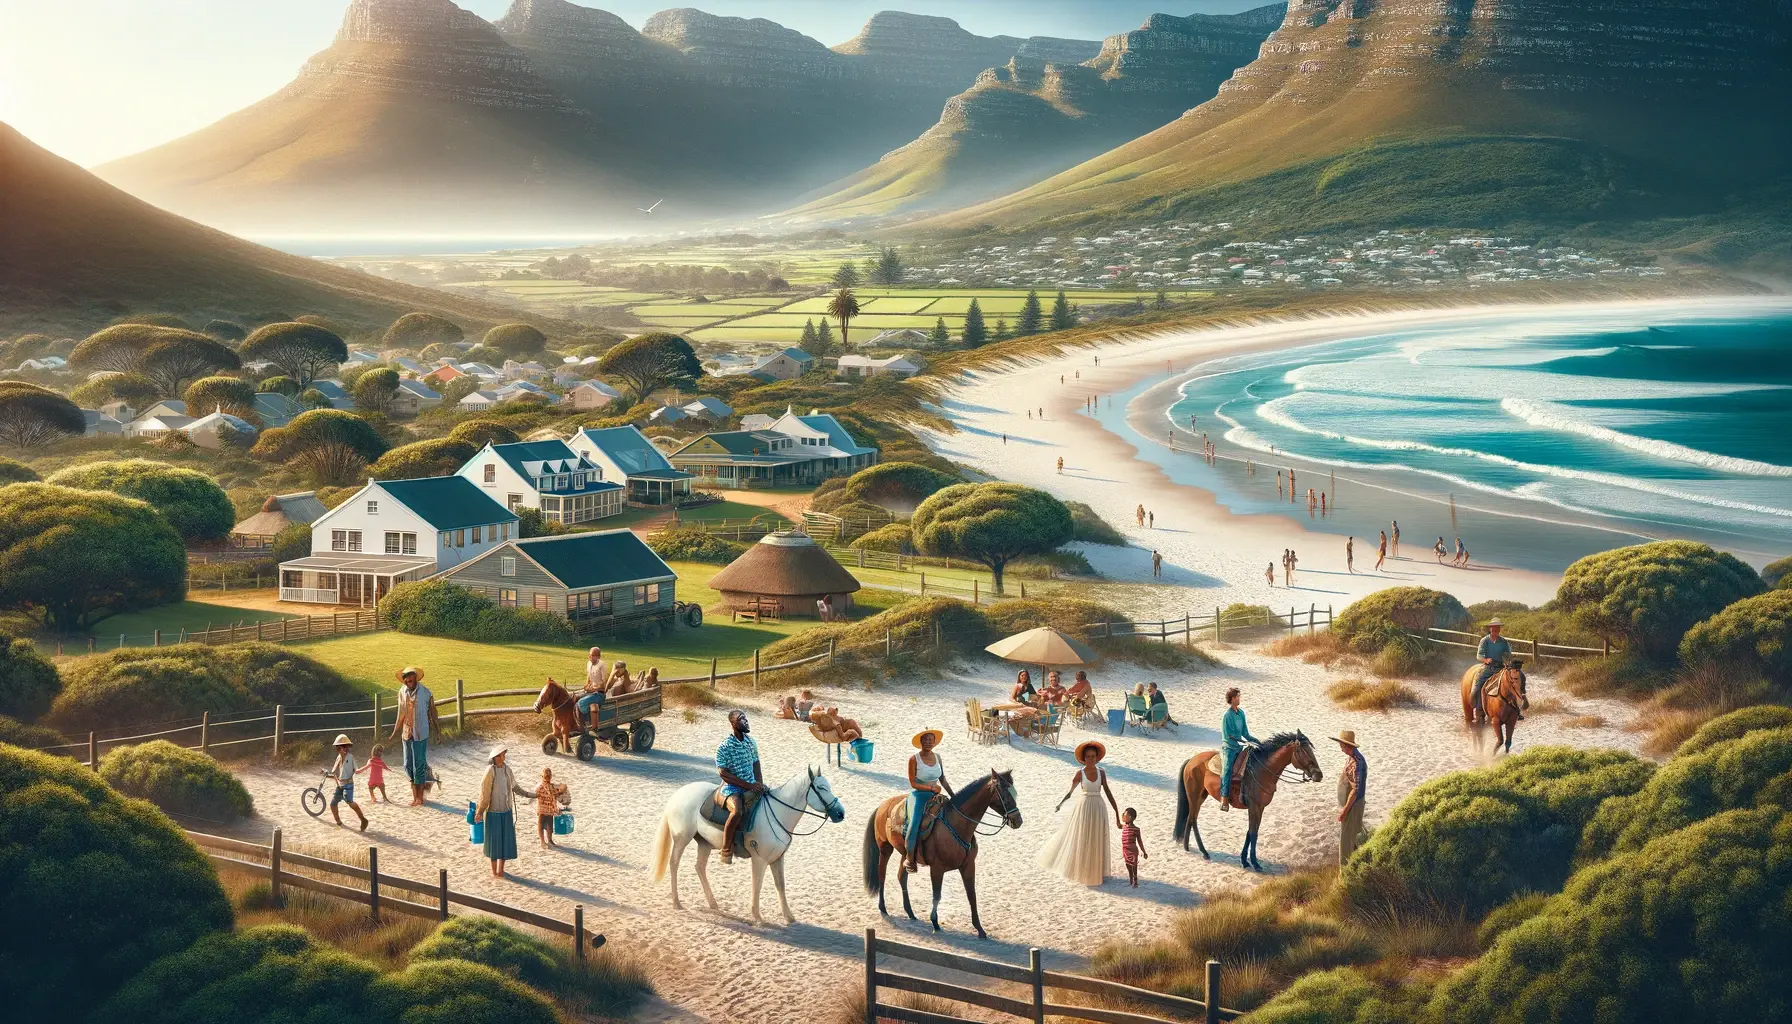 A serene and picturesque image of Noordhoek in Cape Town